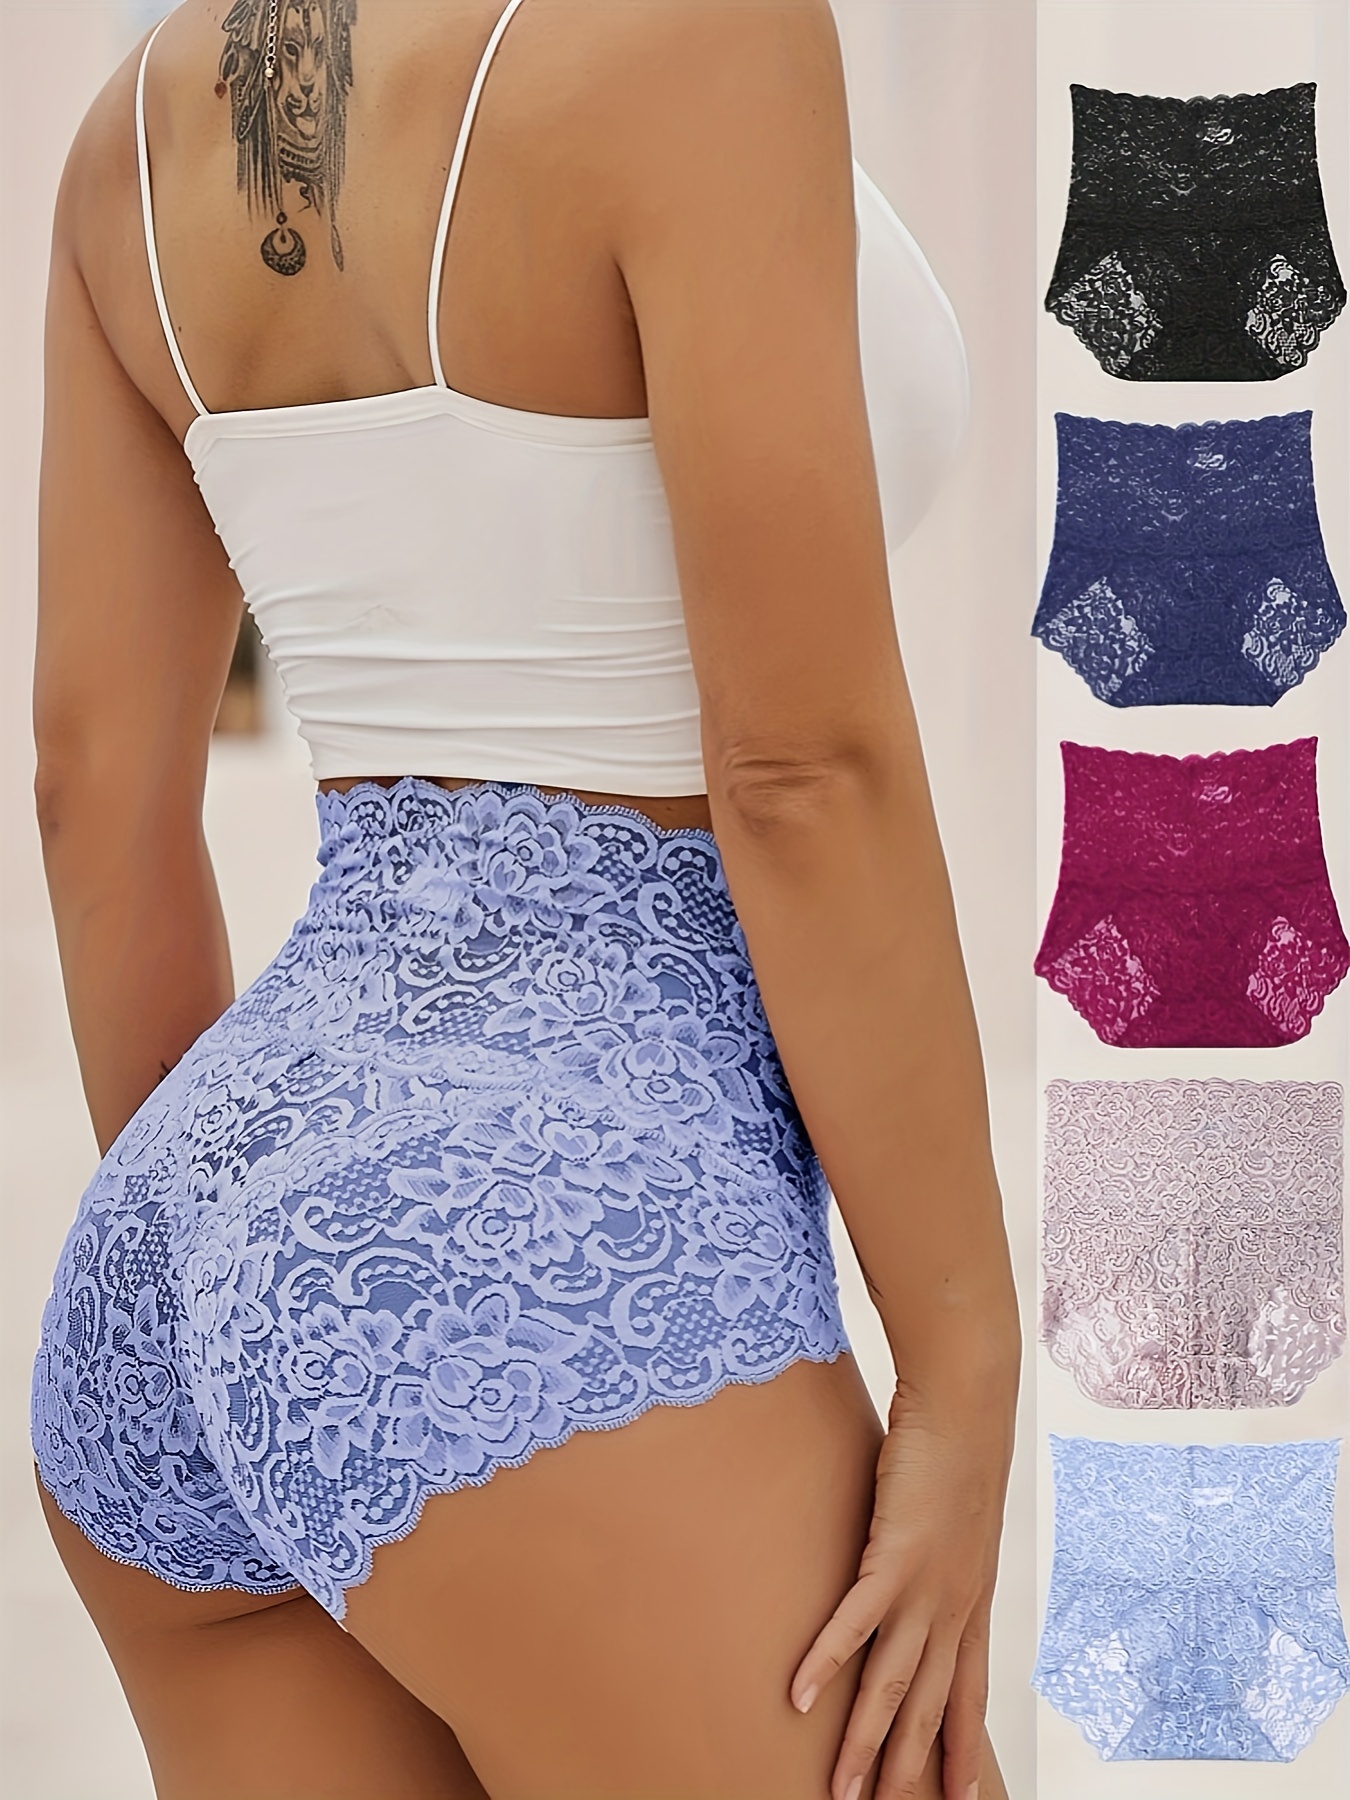 Women's High Waist Underwear Lacy Panties Floral Embroidery Lace Bikini  Silky Comfy Briefs